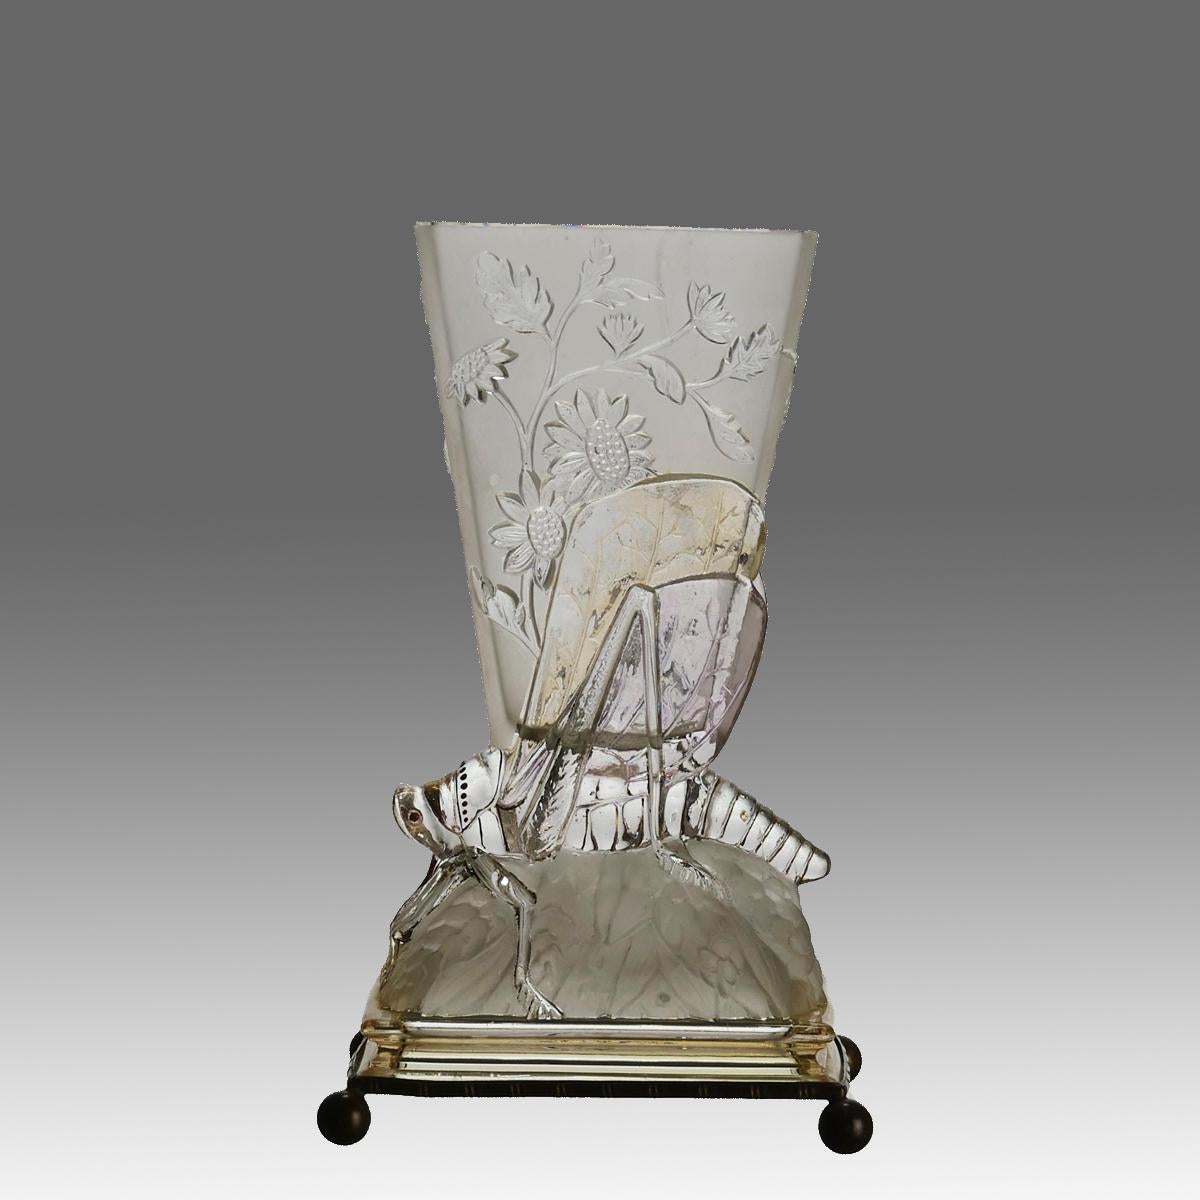 An eyecatching early 20th Century glass vase. decorated with raised floral design above the figure of a grasshopper on a rock with excellent hand finished detail and mounted on a silvered stepped base with four circular bun feet, signed

ADDITIONAL